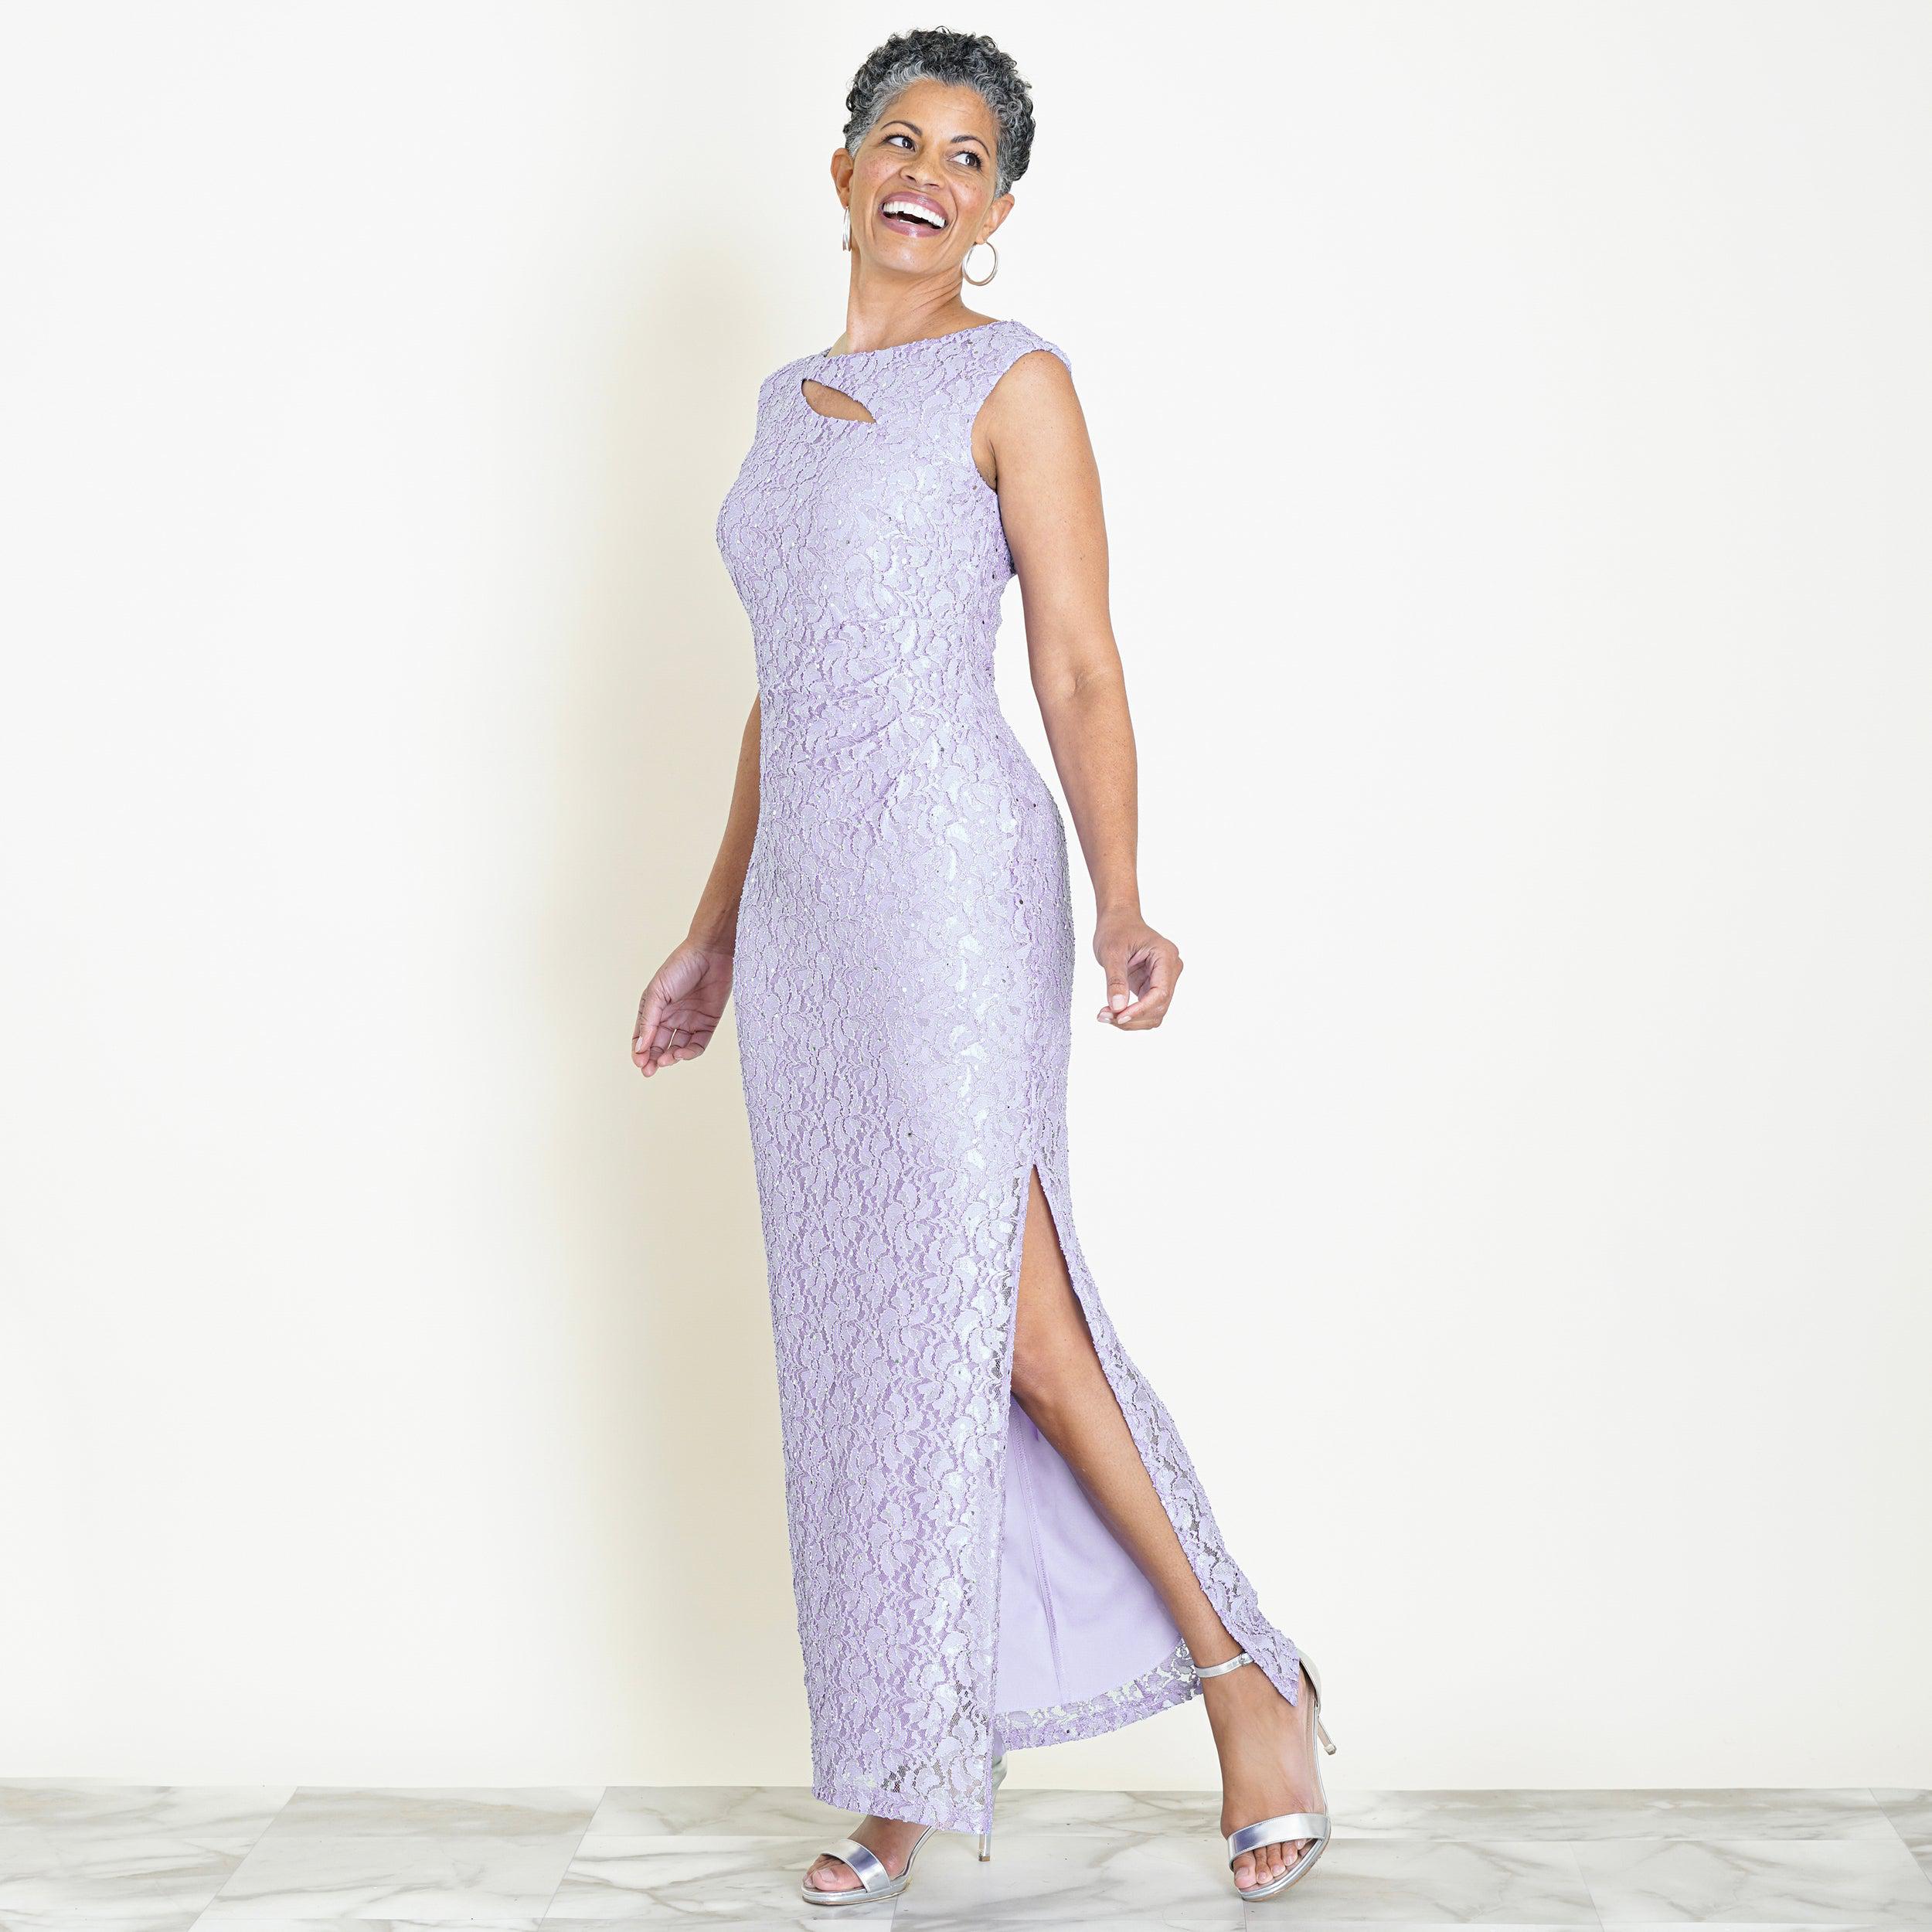 Woman posing wearing Lavender Elizabeth Lavender Sequin Lace Floor Length Dress from Connected Apparel